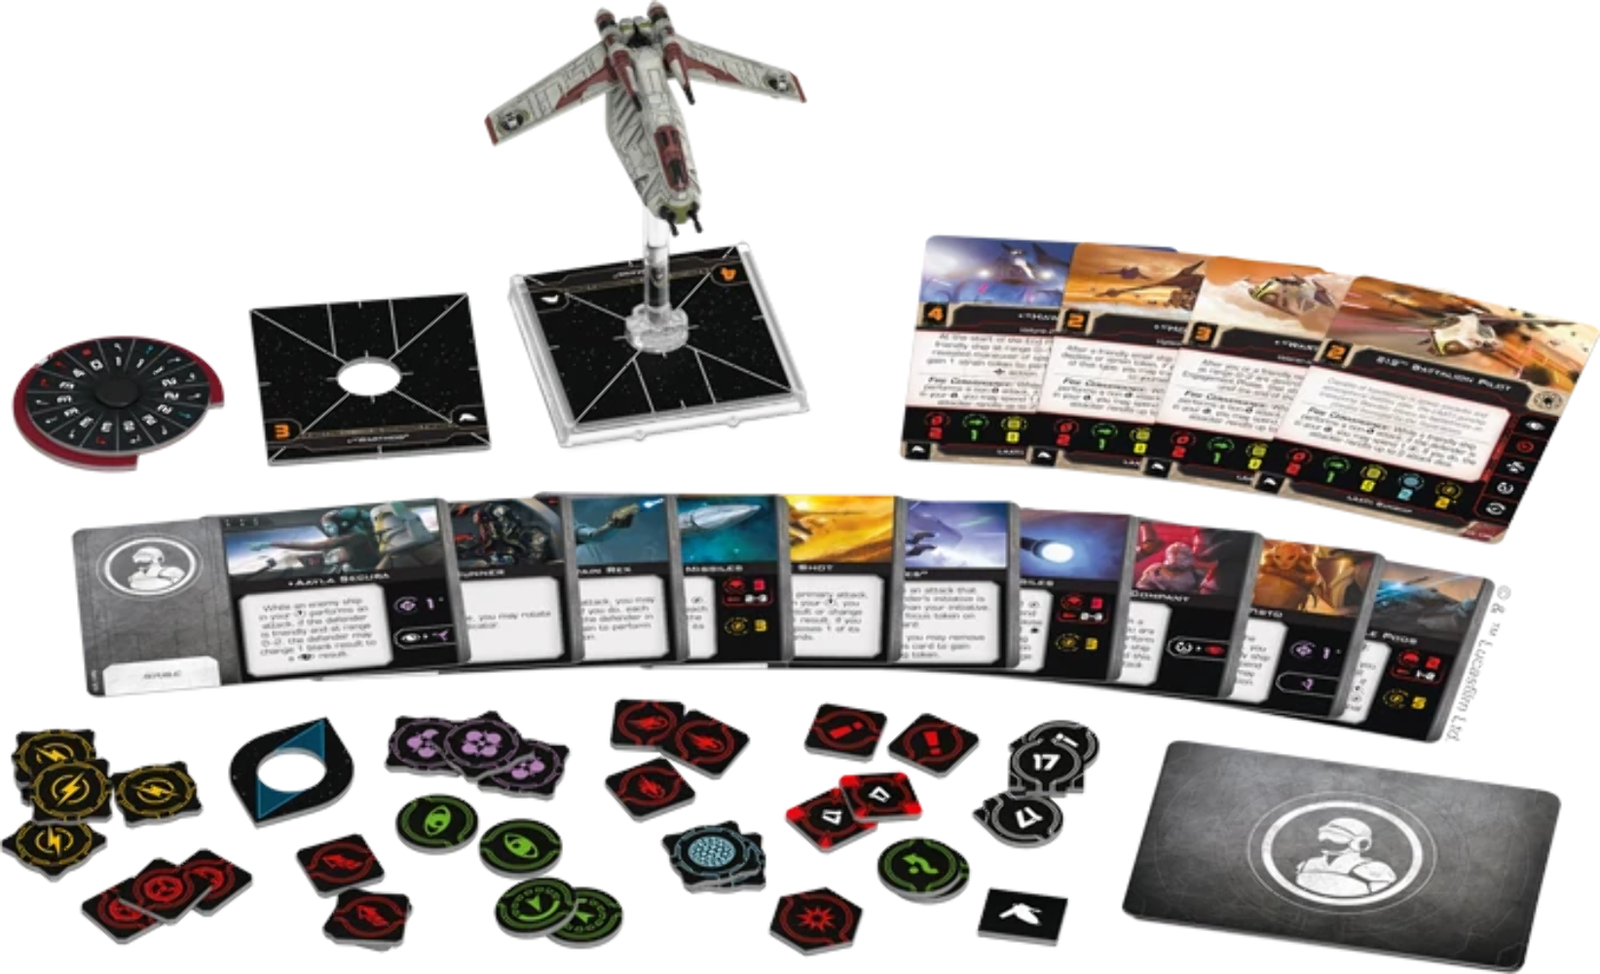 Star Wars X-Wing: LAAT/i Gunship Expansion Pack - Loaded Dice Barry Vale of Glamorgan CF64 3HD